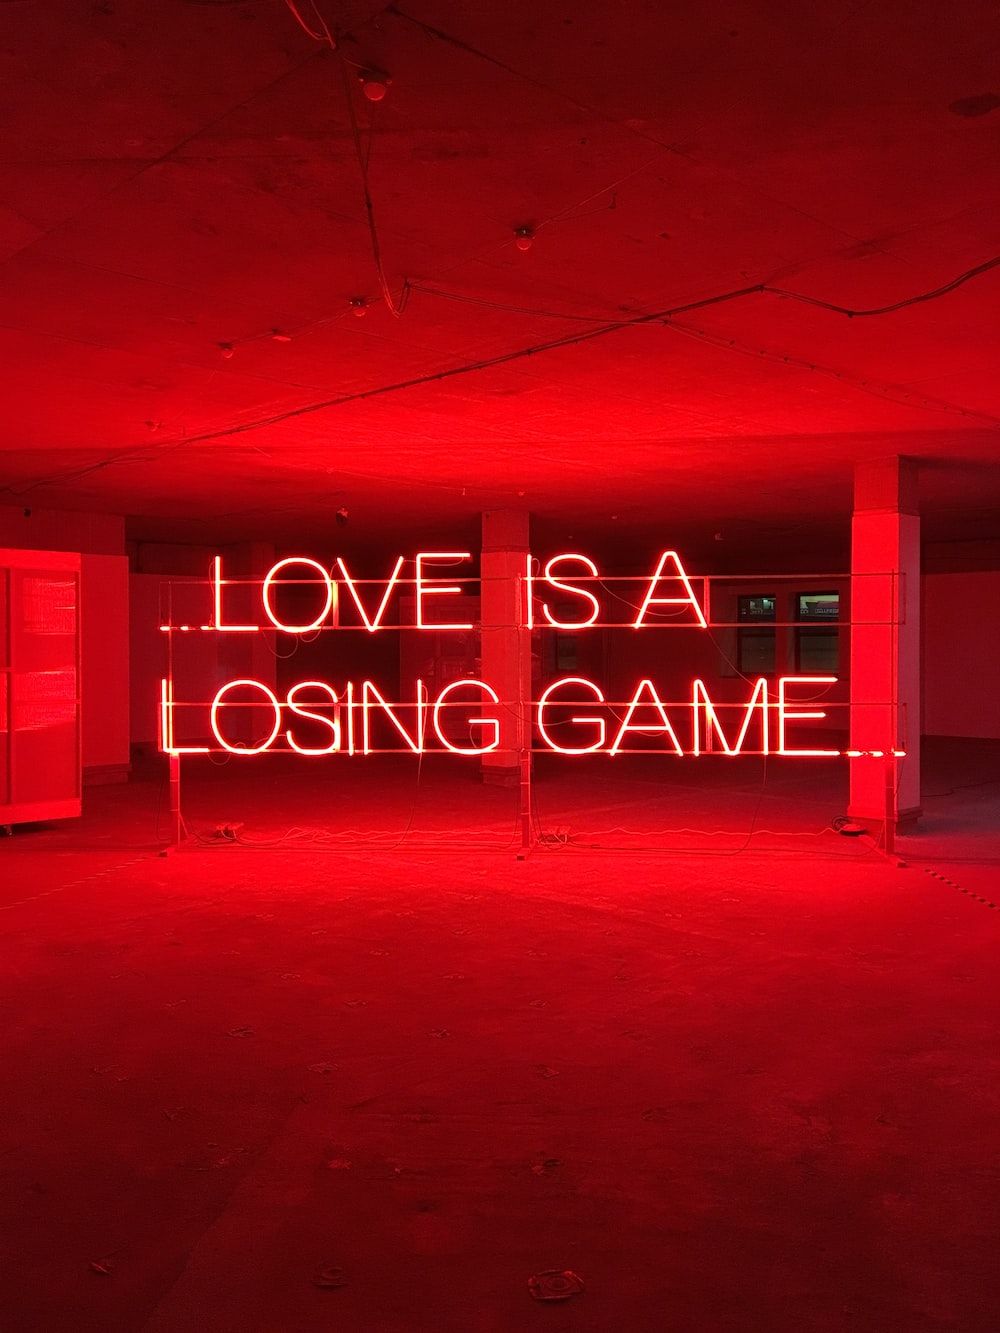 Love is a losing game - Neon red